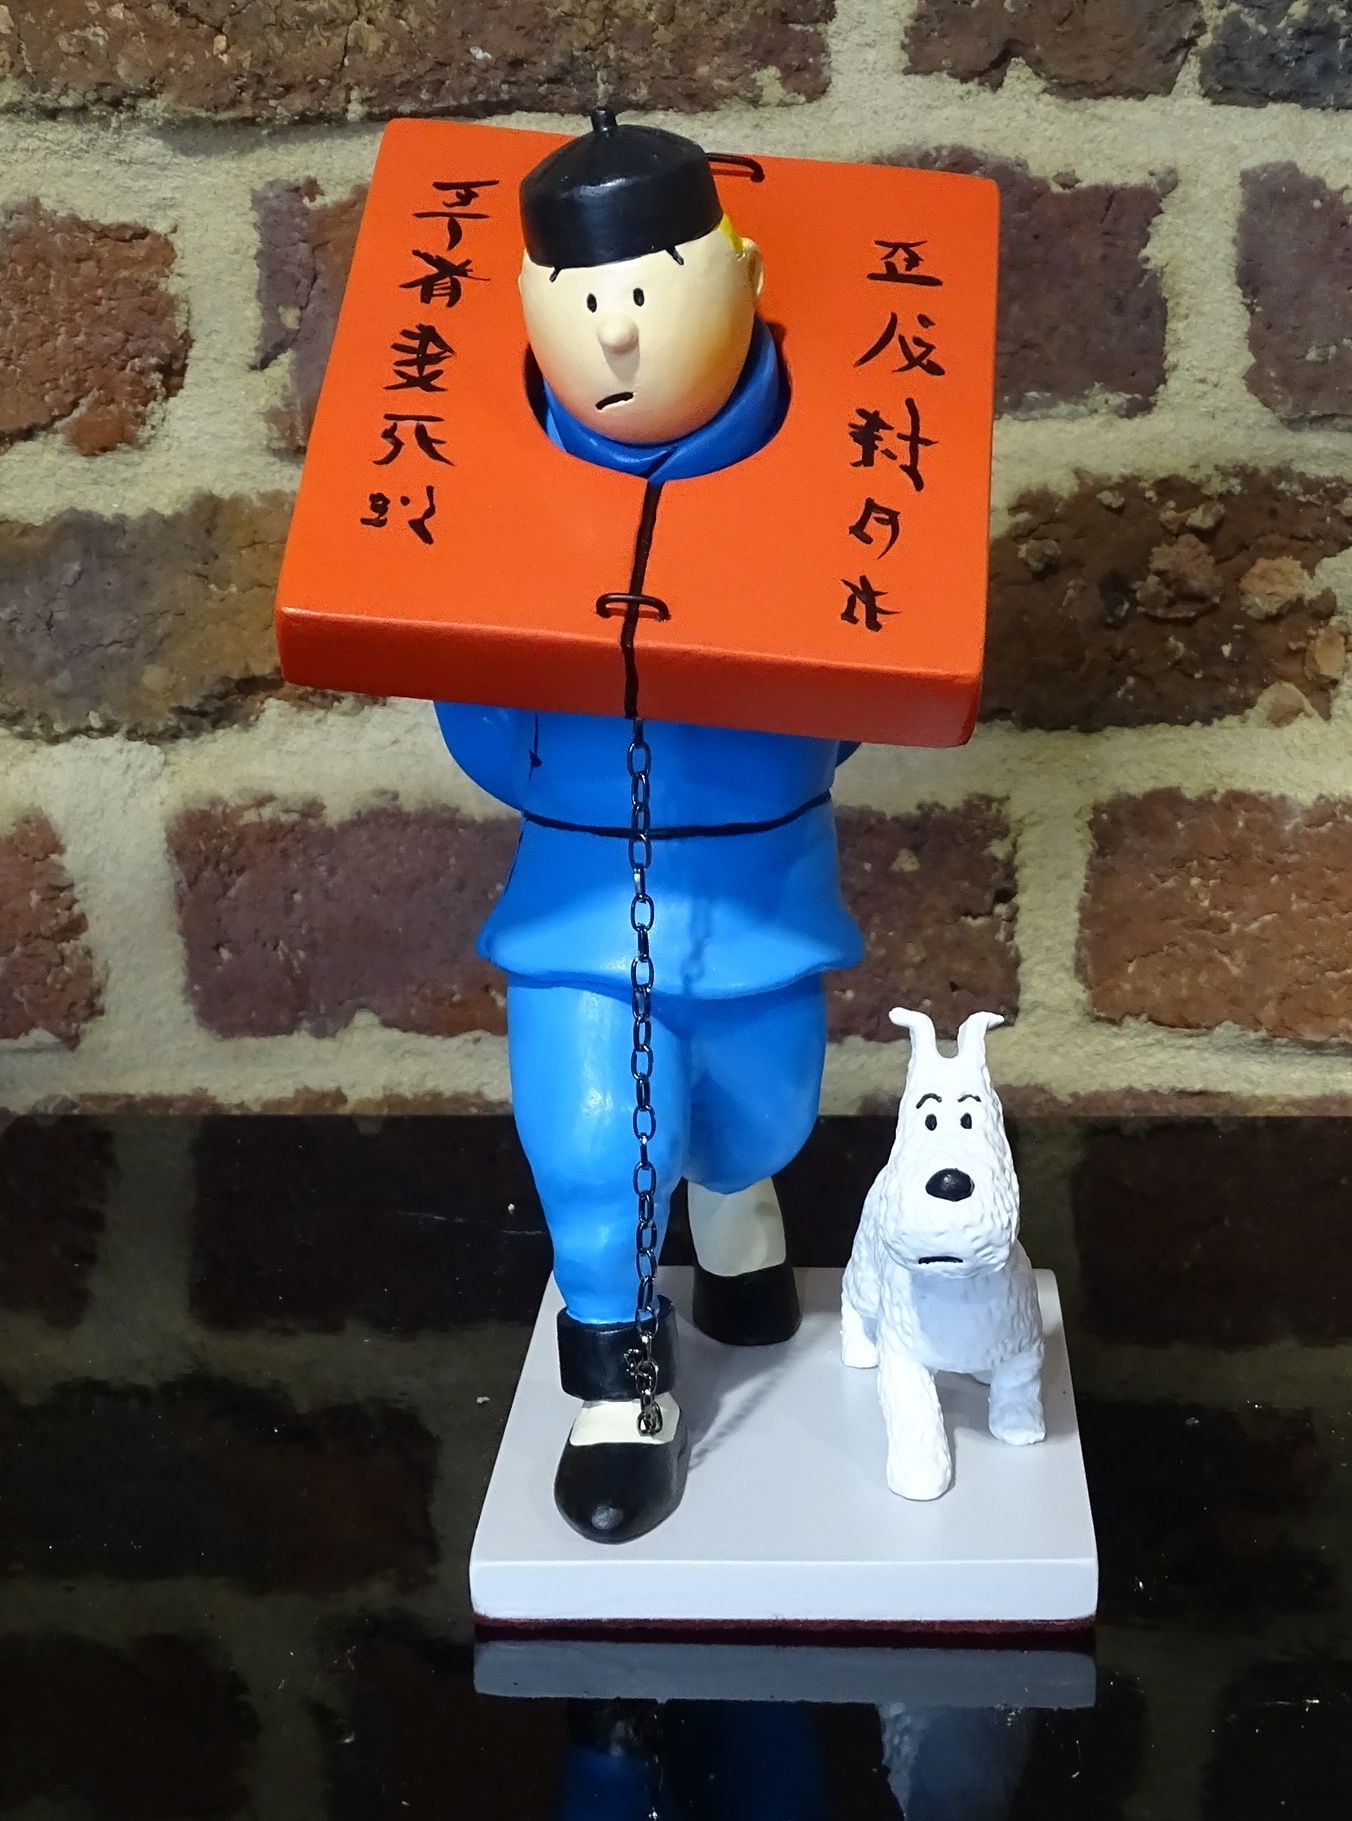 Tintin & Hergé 
Statuette Tintin in captivity of the Blue Lotus, height 25cm.